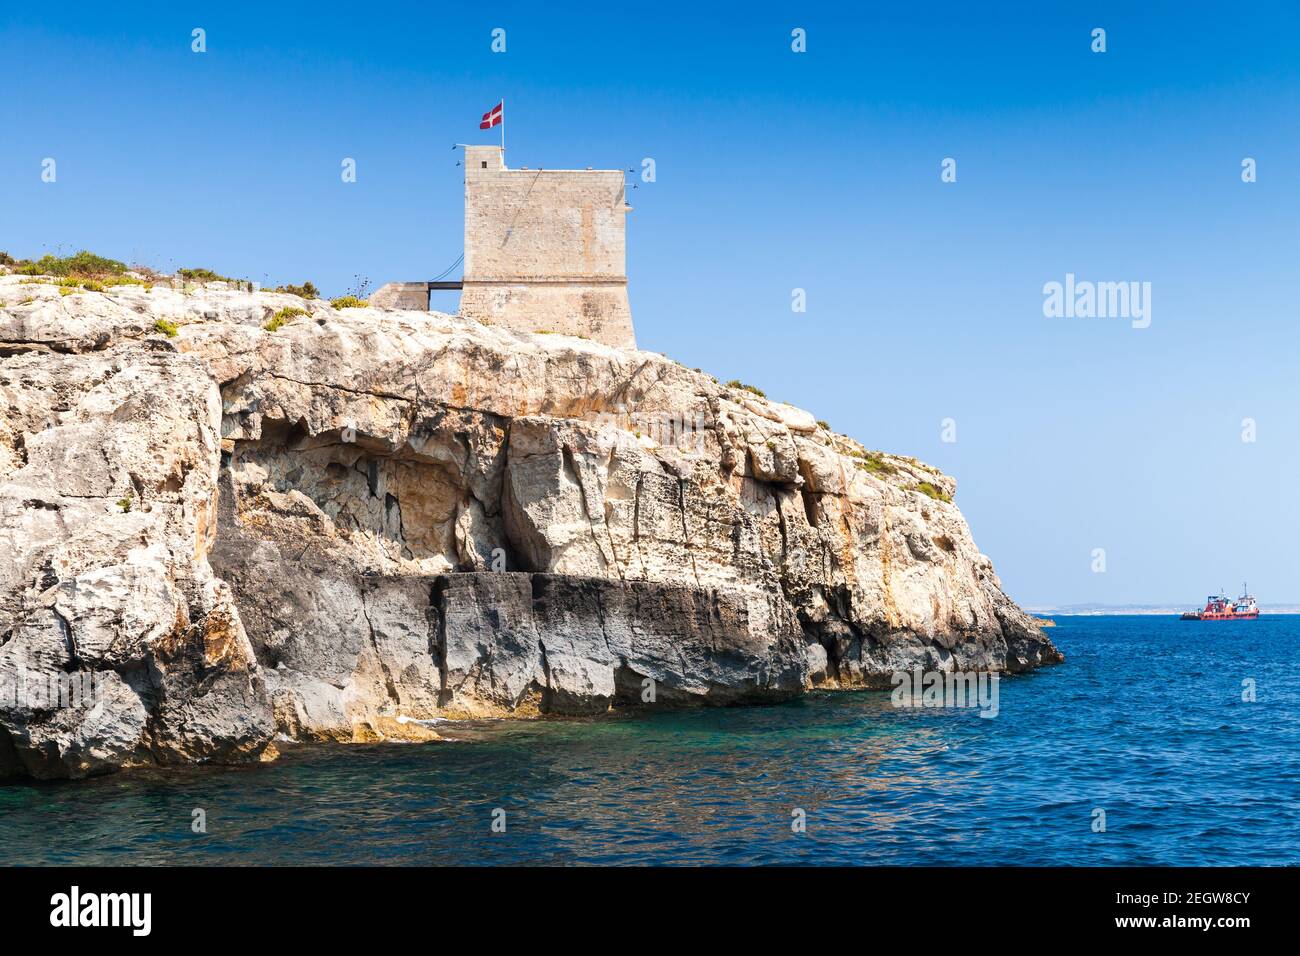 Coastal landscape with Mgarr ix-Xini Tower, the largest of the coastal watchtowers that the Knights of Malta erected on the island of Gozo Stock Photo